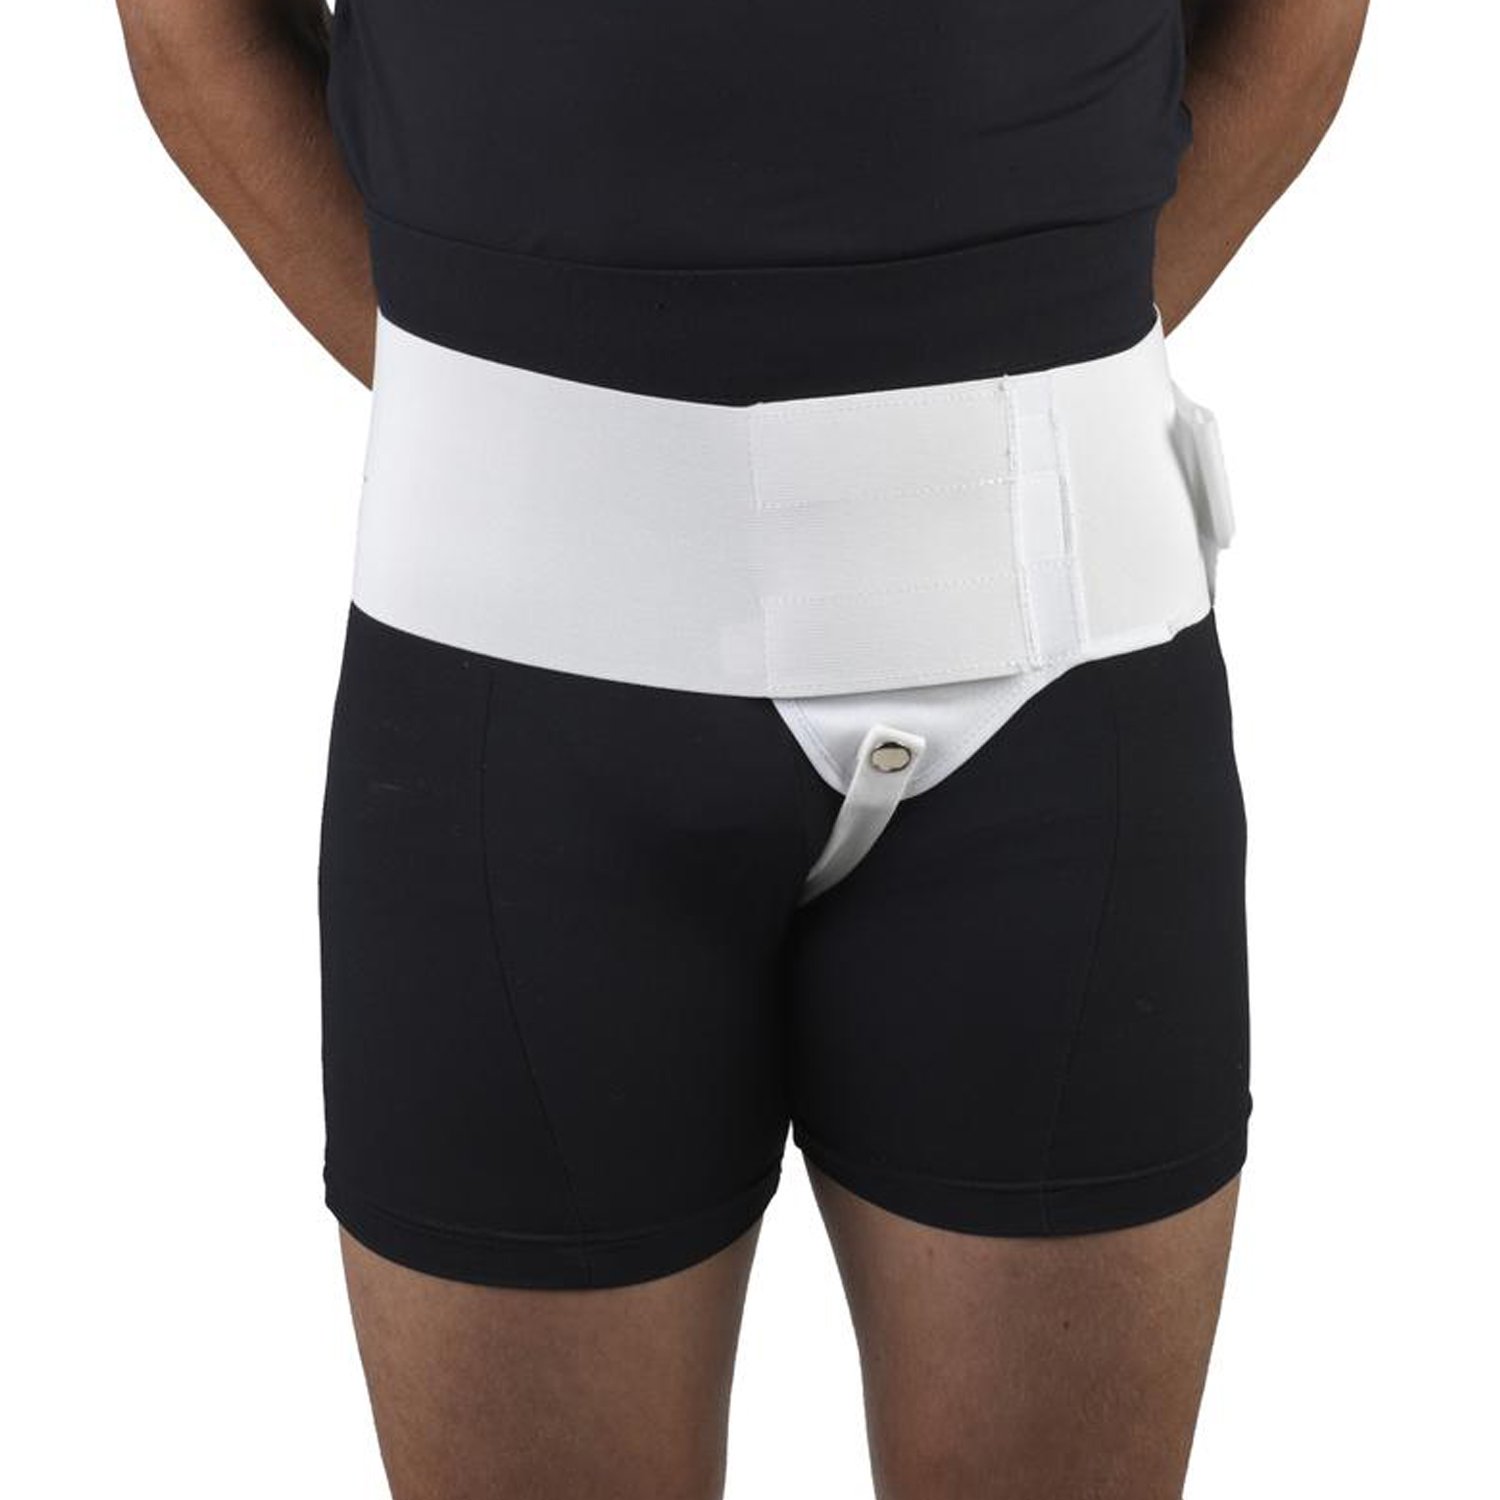 Single Hernia Support